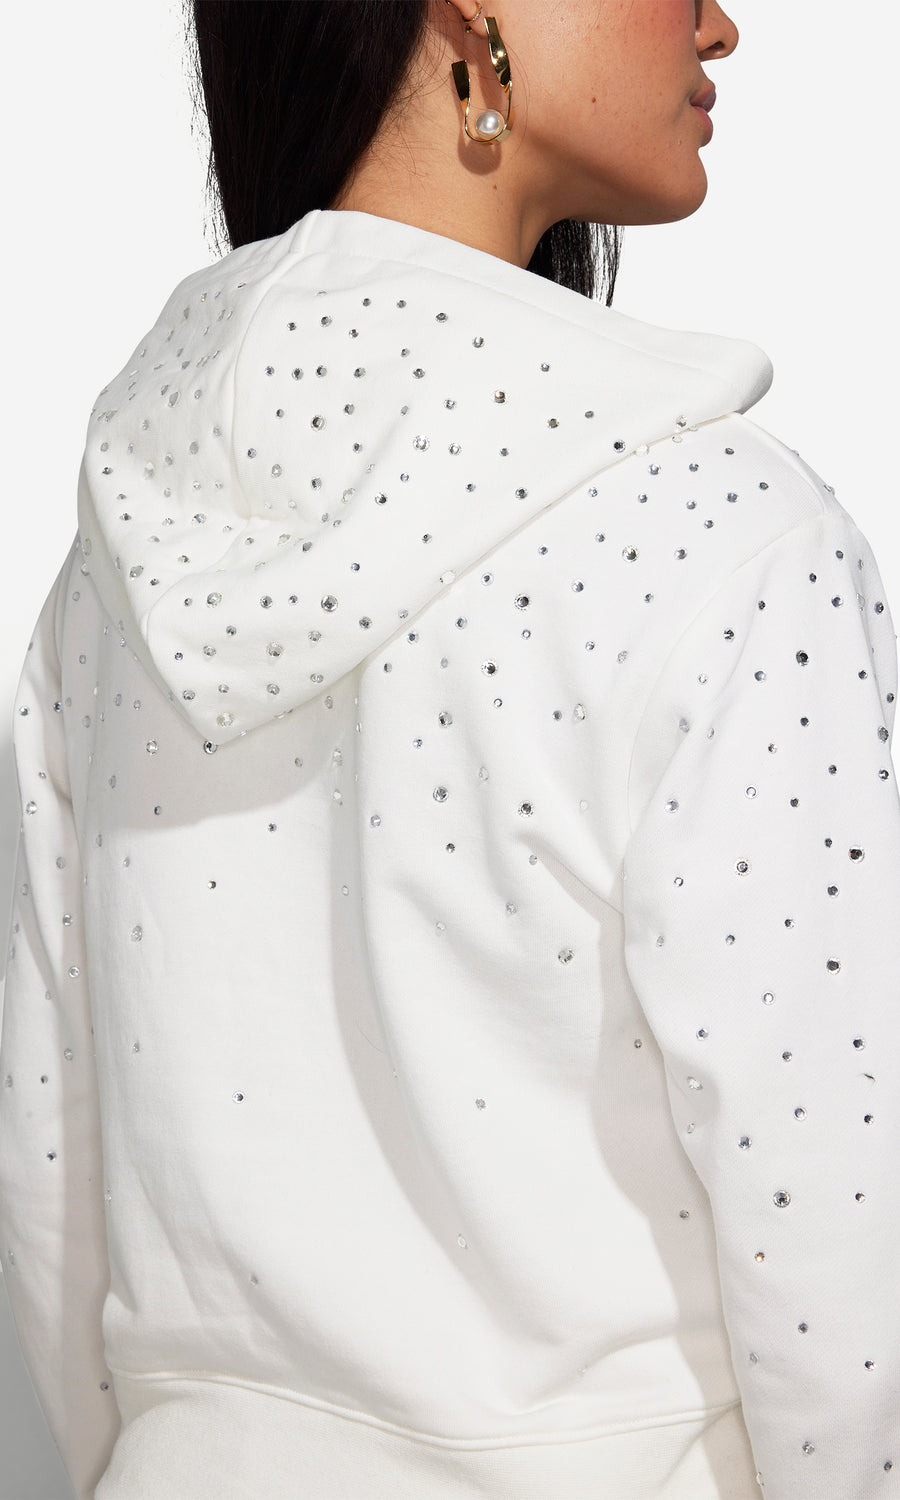 Edith Crystal Hoodie - White/Clear 